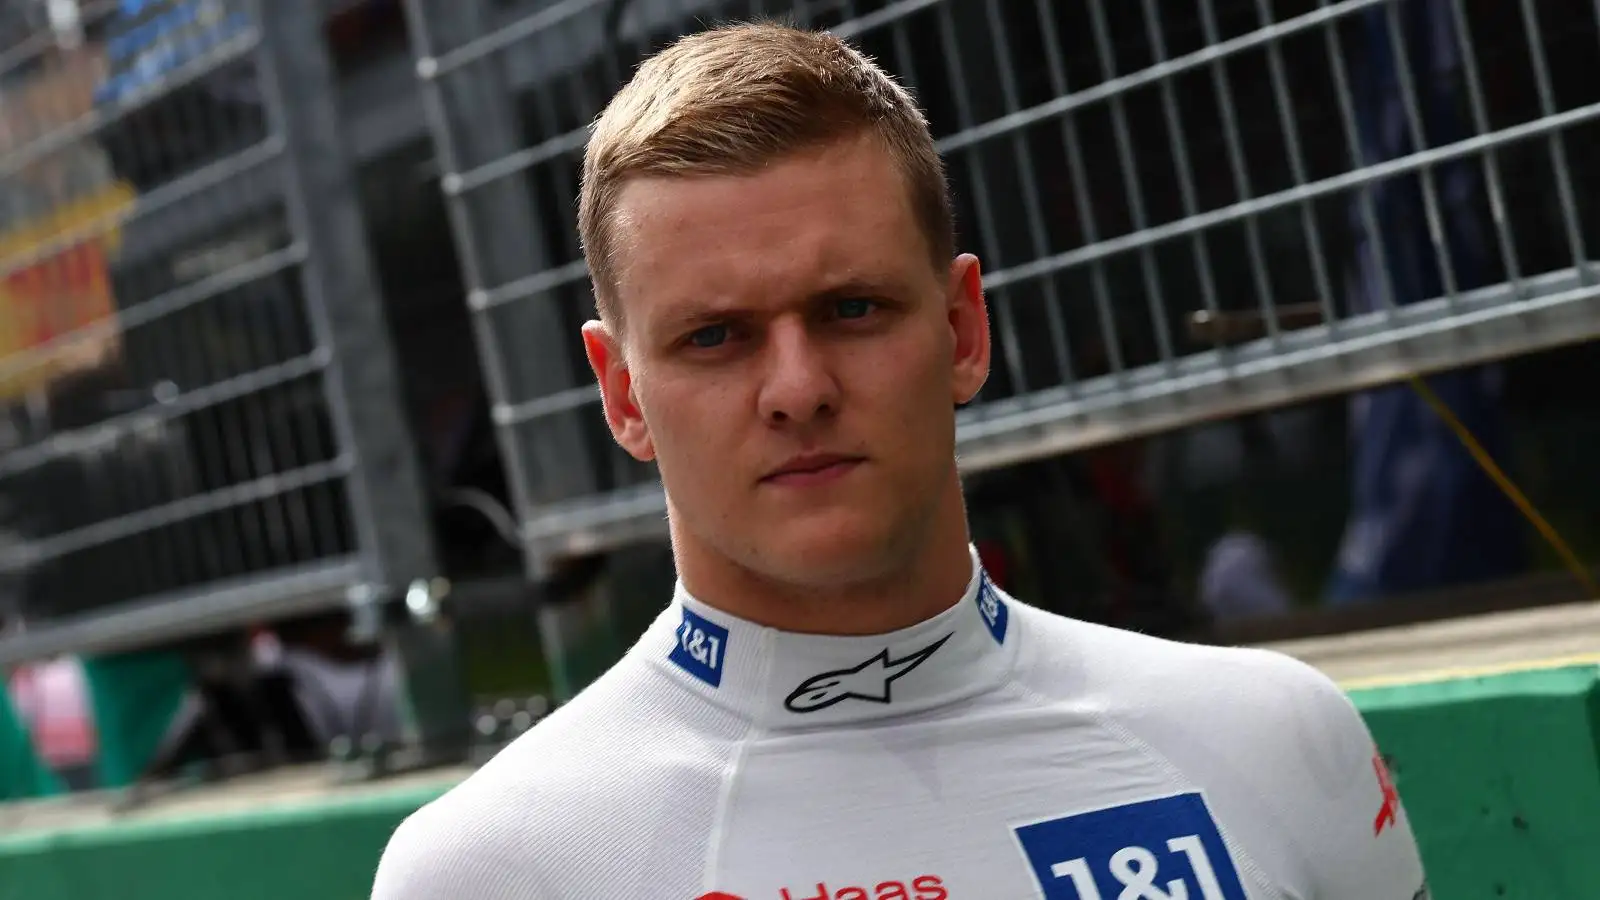 Mick Schumacher on the grid before the Austrian GP. Red Bull Ring July 2022.